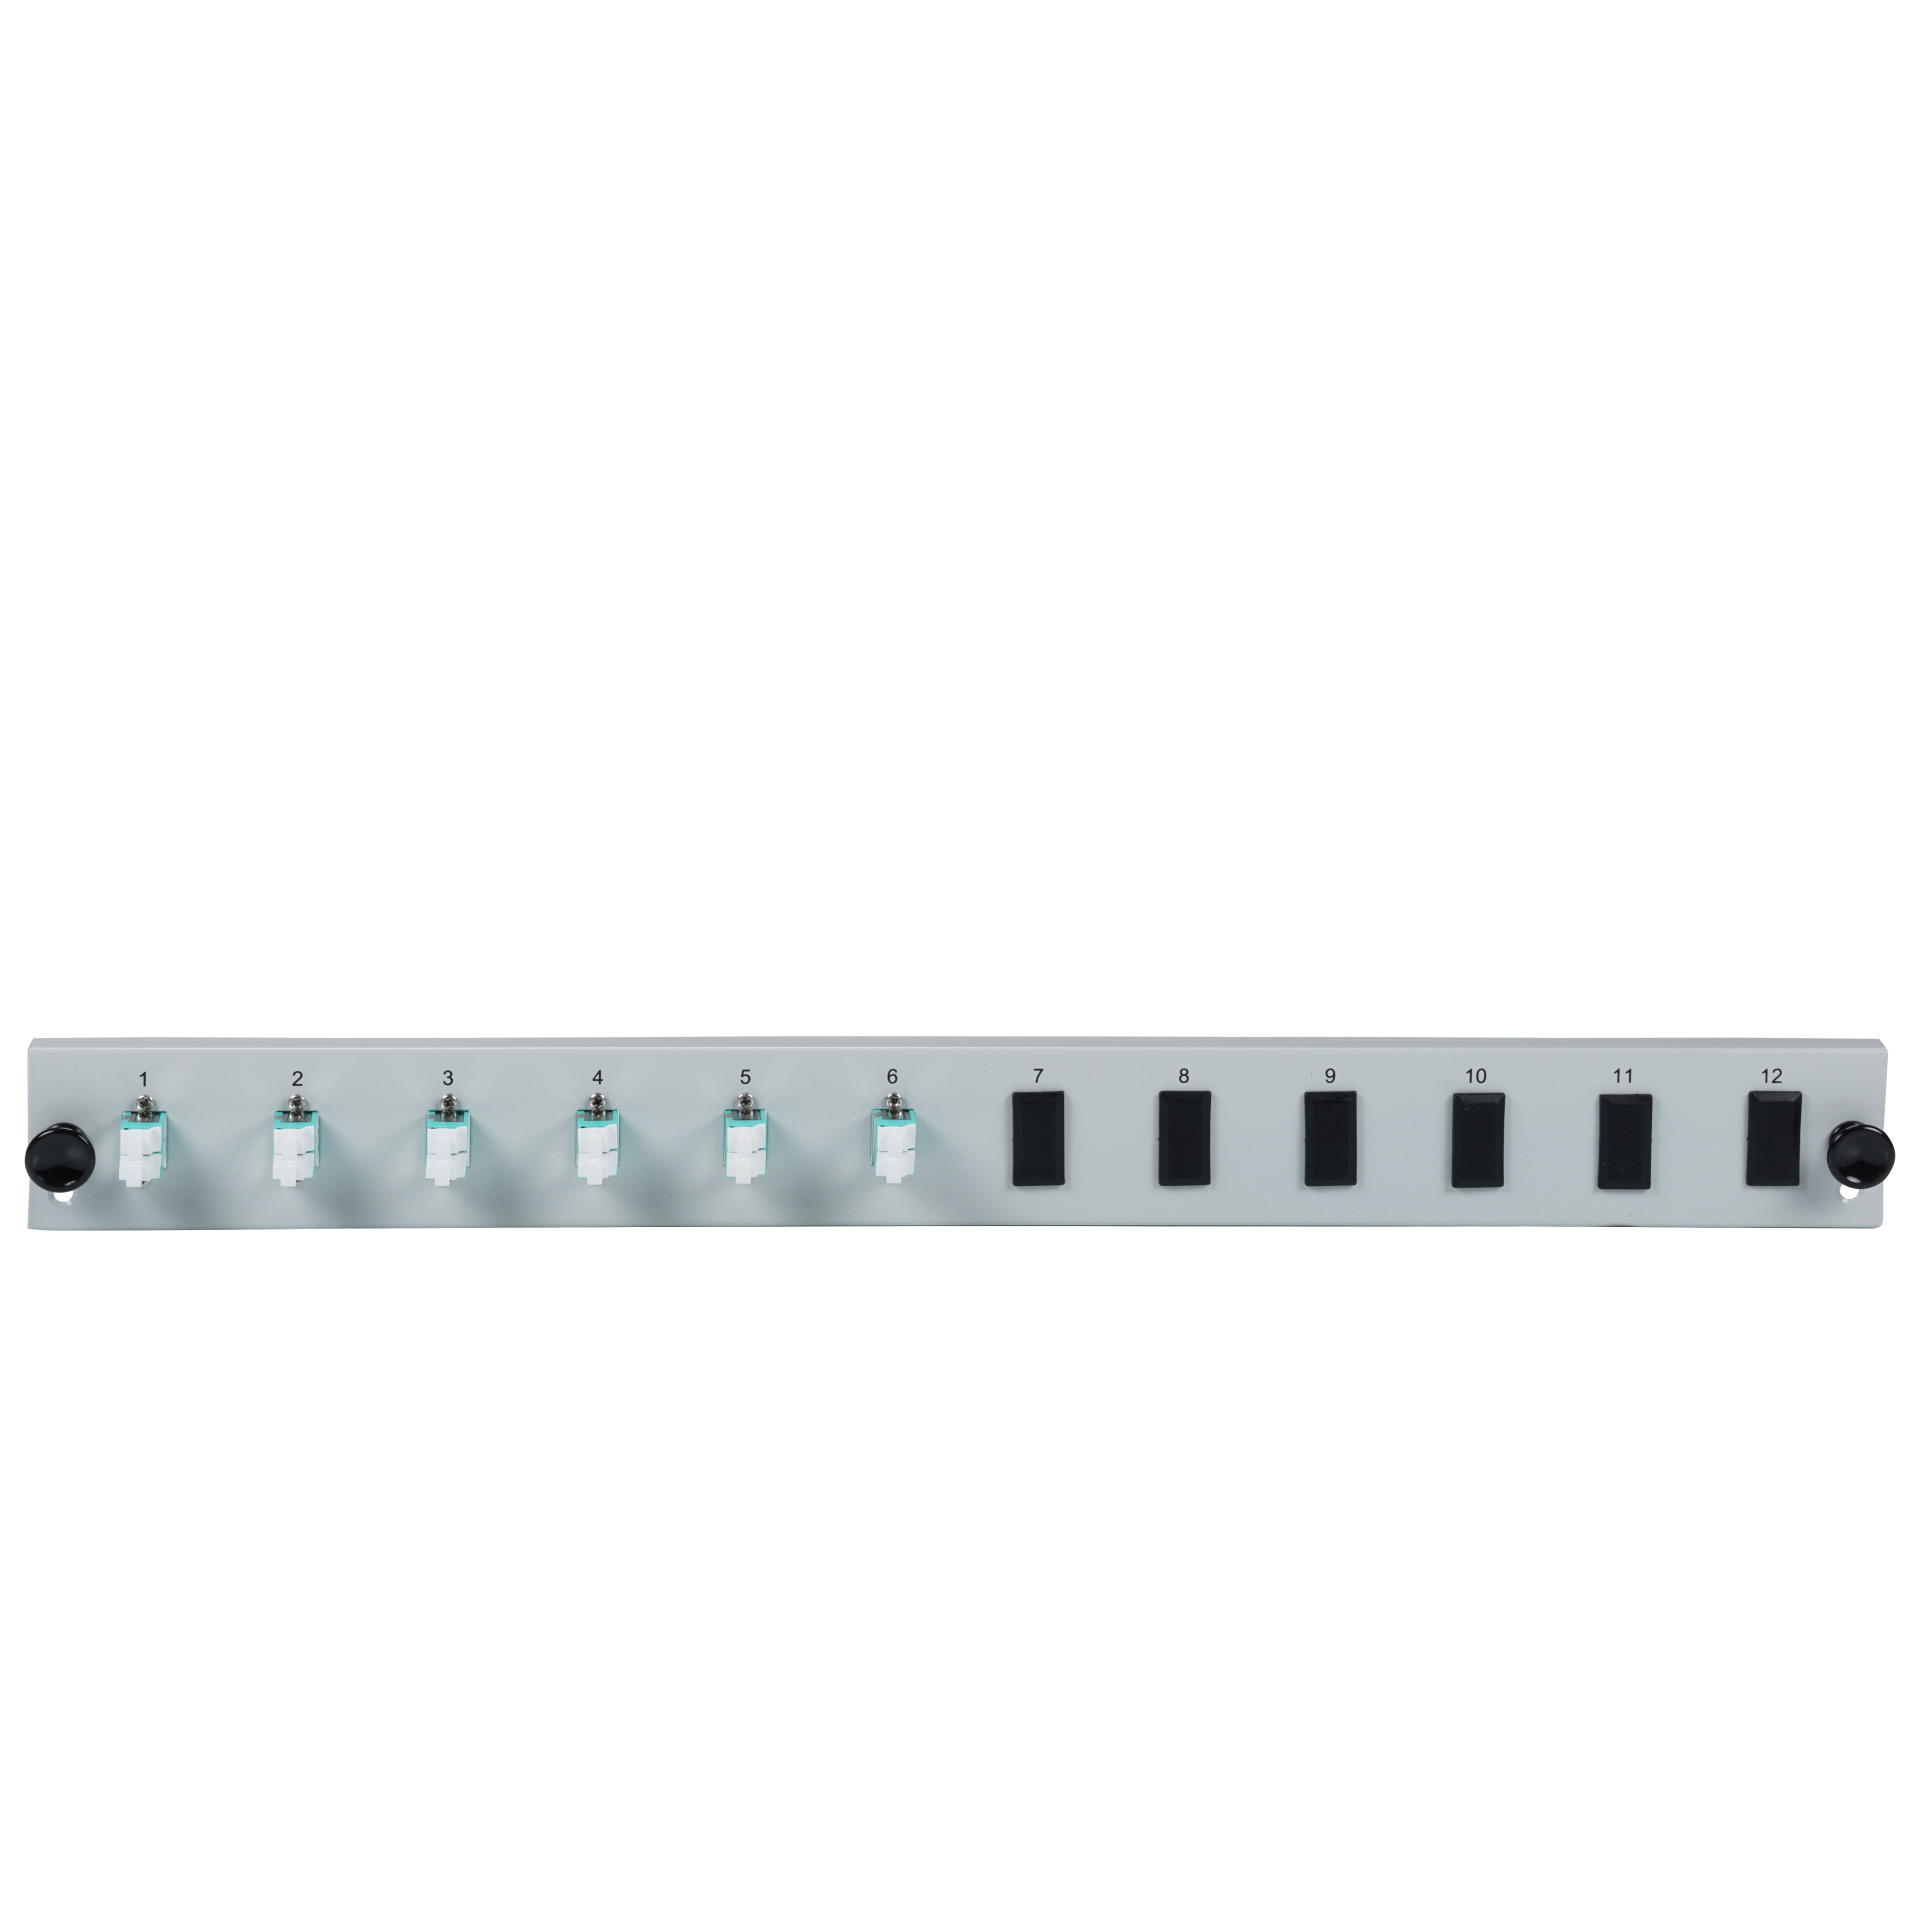 Equiped 12 Port Front Panel with 6x LC duplex adapter OM3 vertical, grey